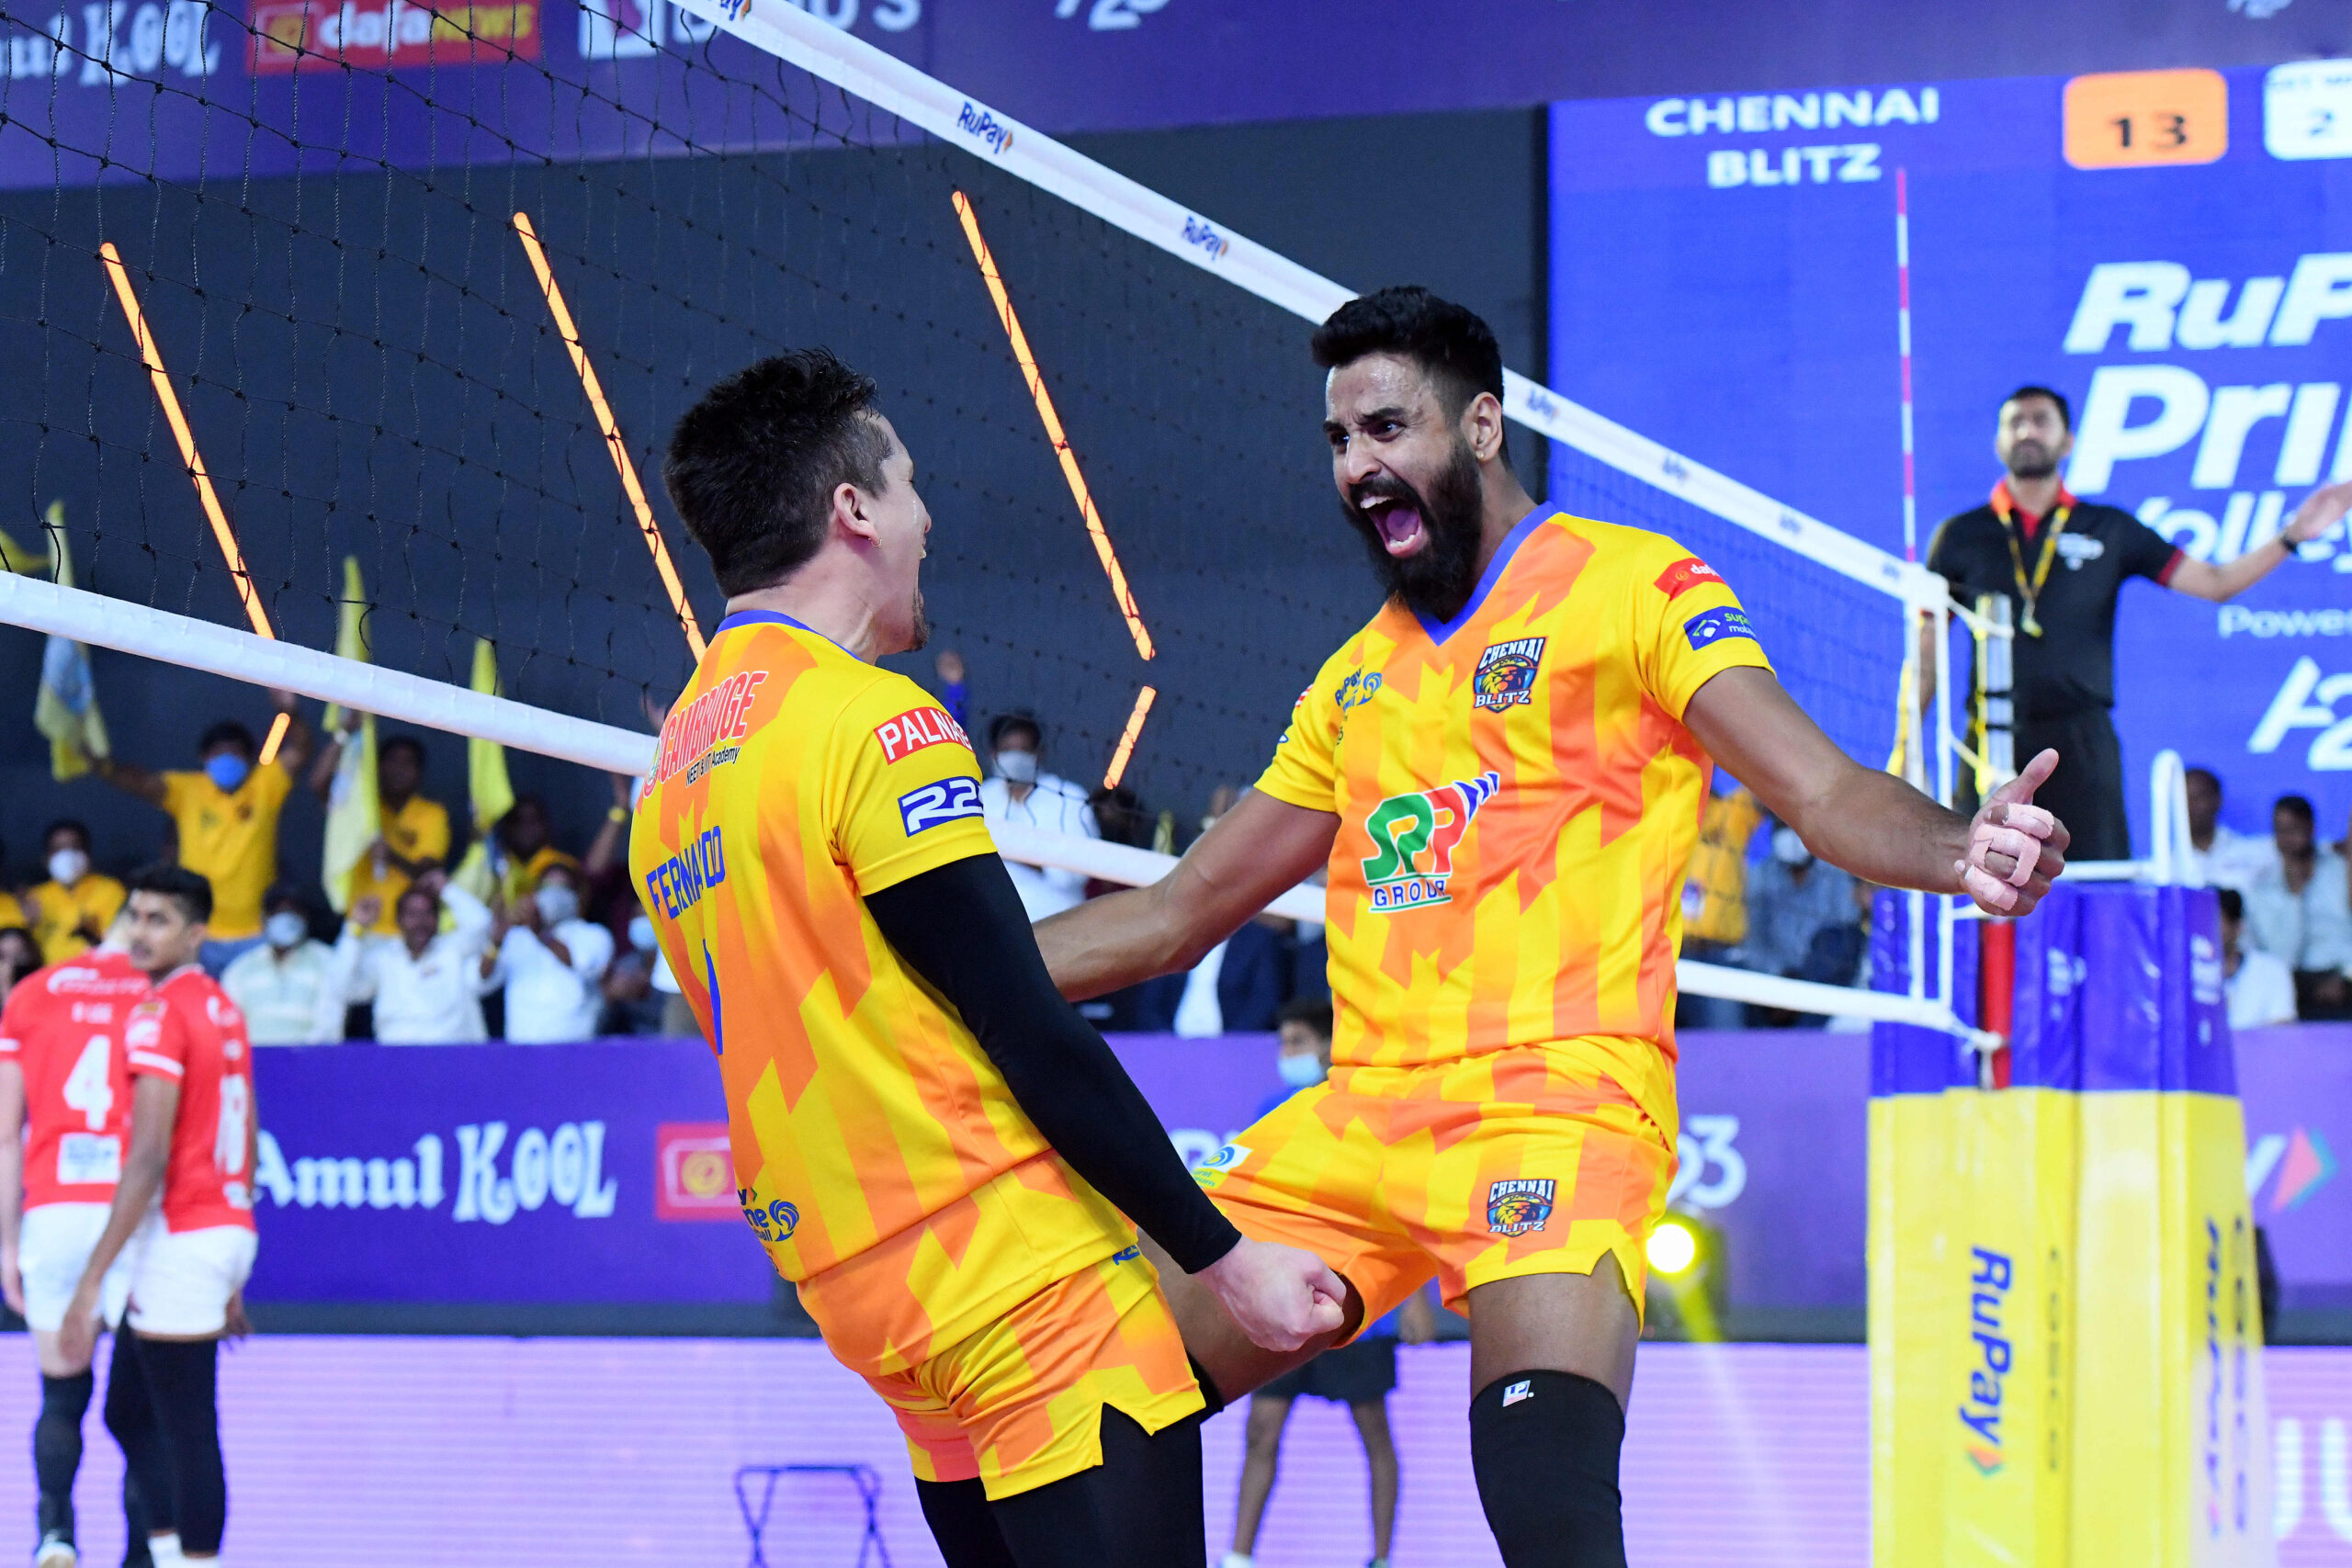 Bruno Da Silva inspires Chennai Blitz to their first victory in the RuPay Prime Volleyball League